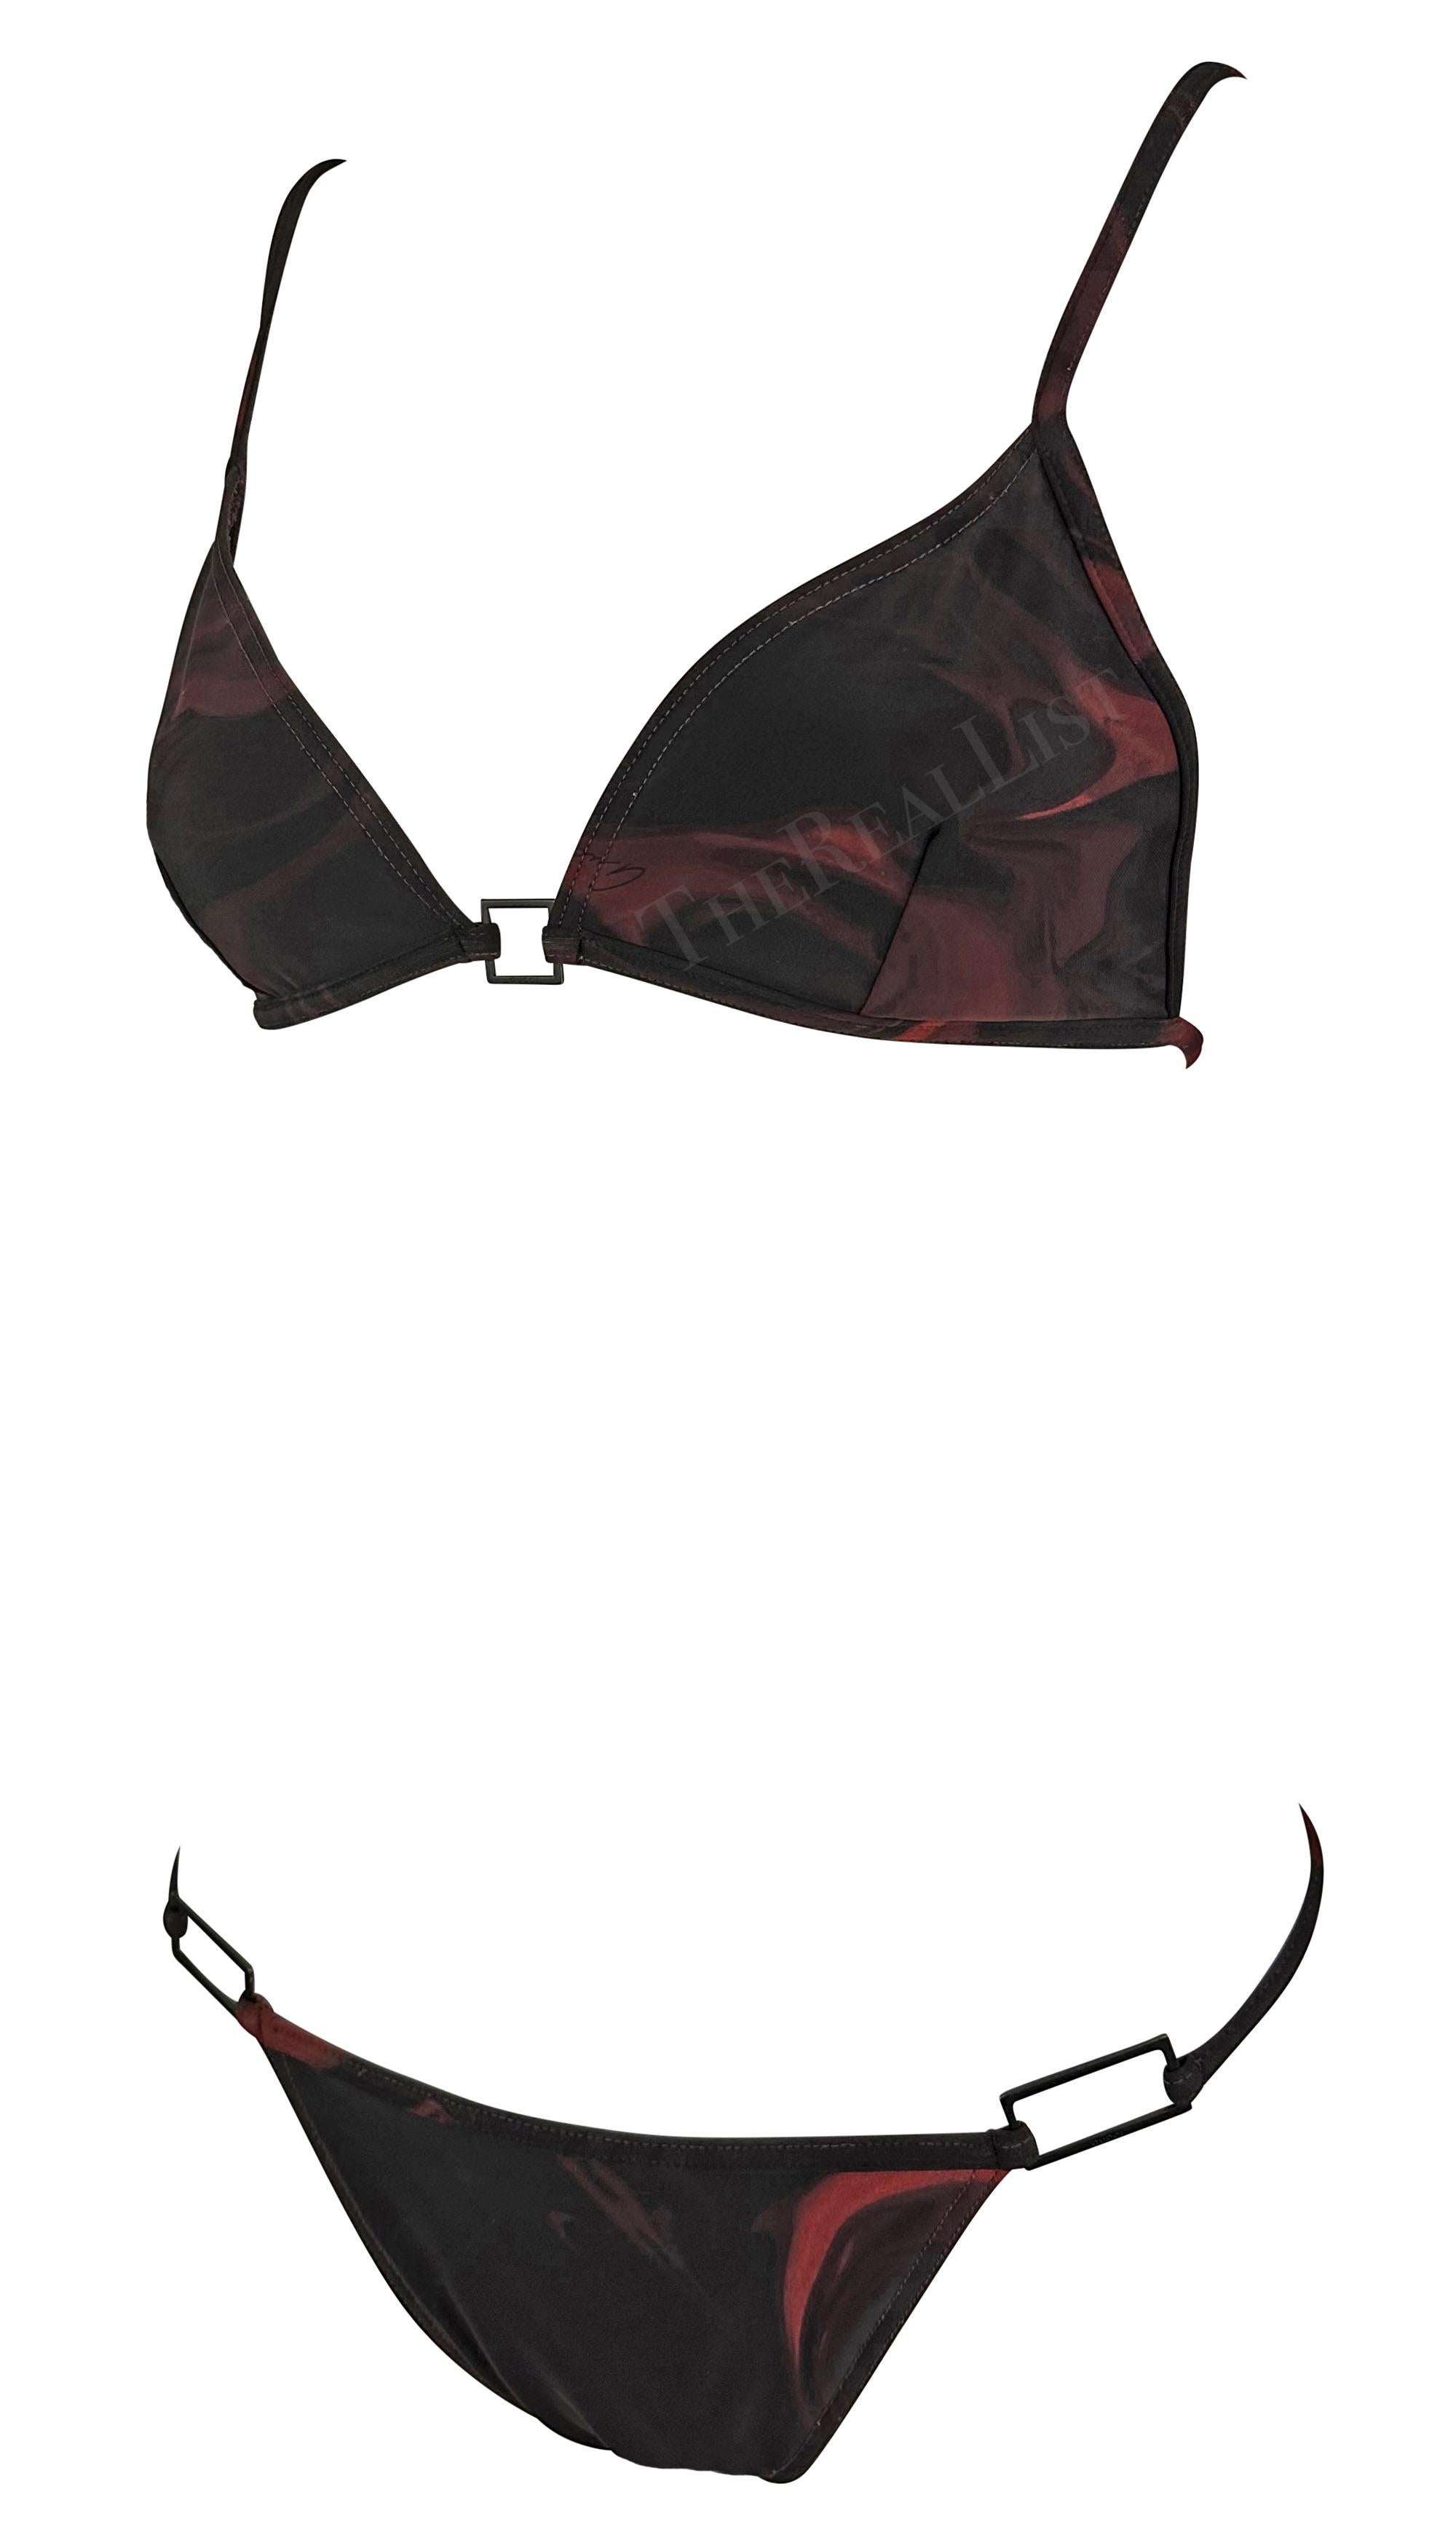 S/S 2001 Gucci by Tom Ford Black Red Magma Print Logo Buckle Bikini Two-Piece For Sale 4